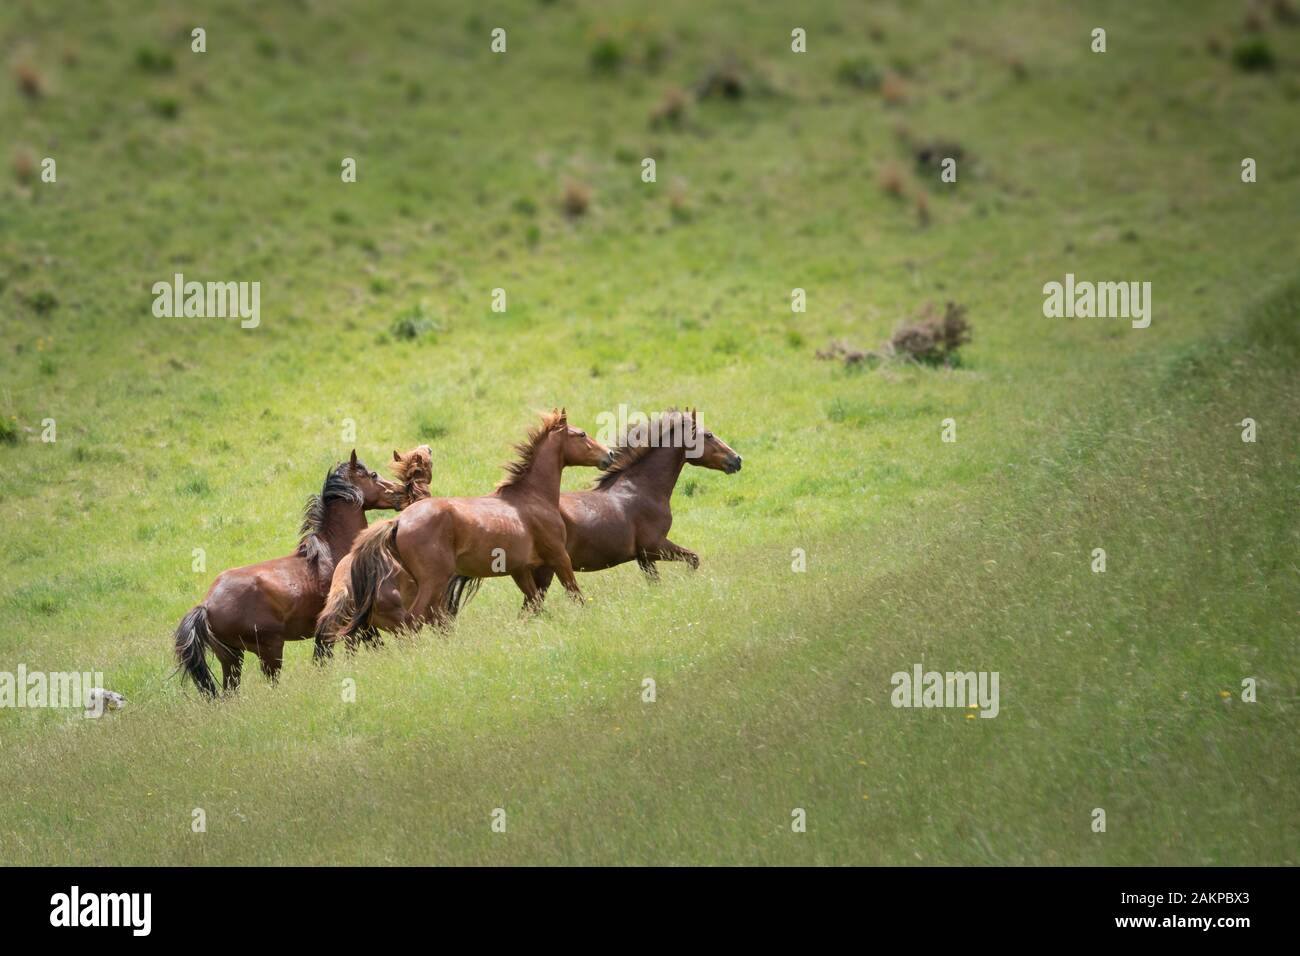 Wild Kaimanawa horses running on the green hills of the mountain ranges, Central Plateau, North Island, New Zealand Stock Photo